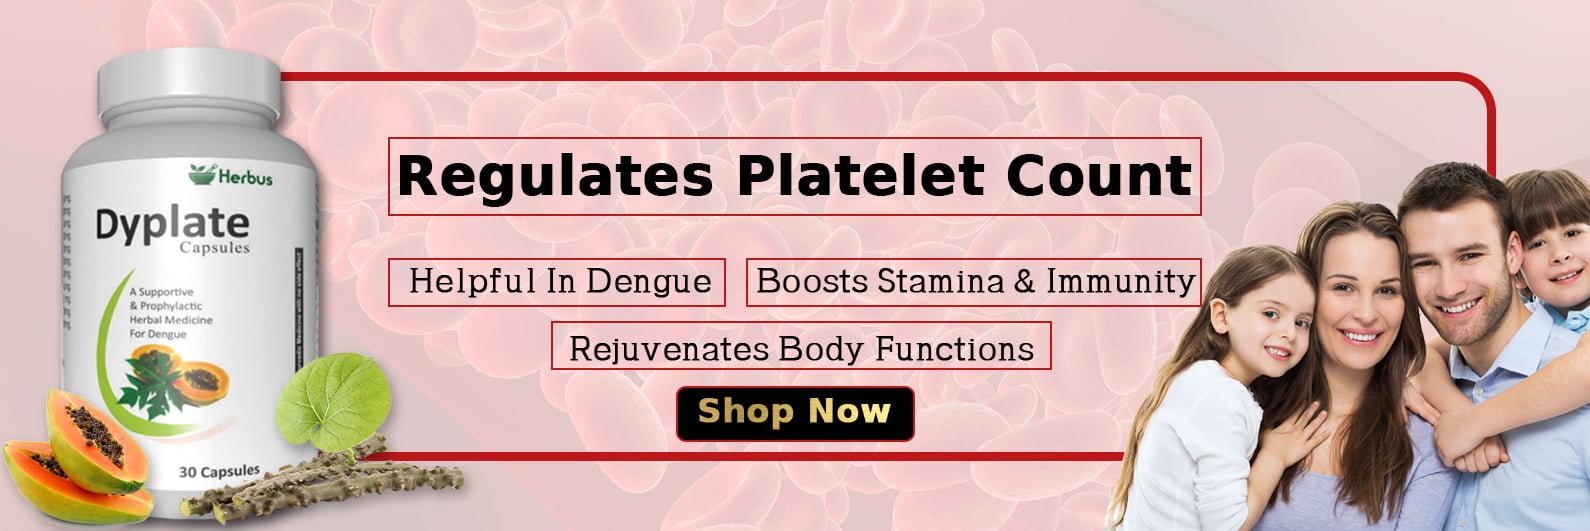 platelet count increase